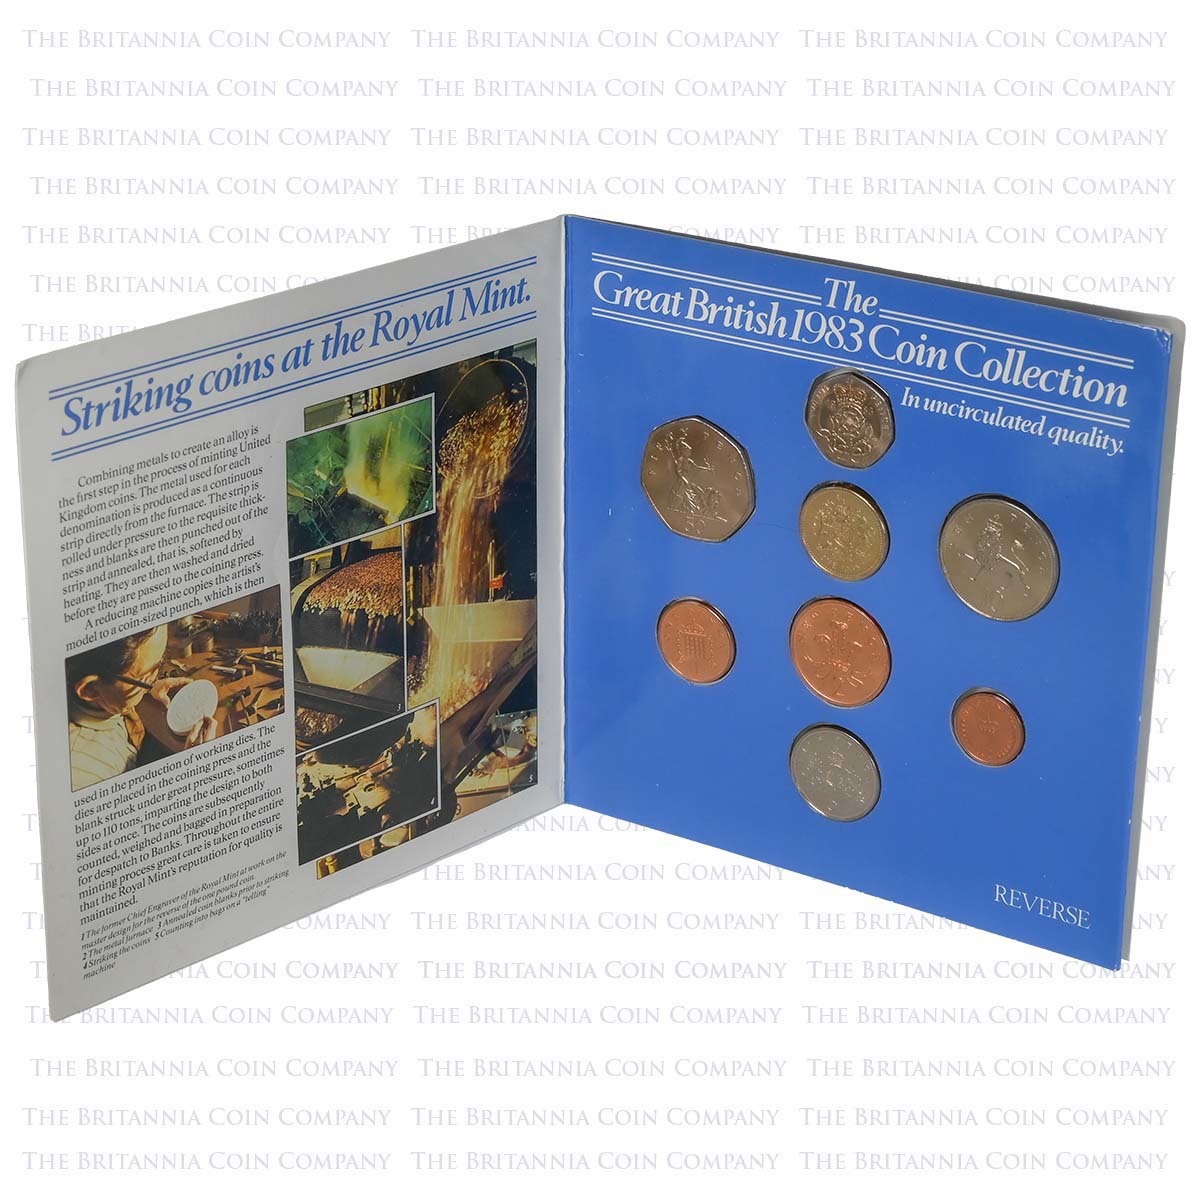 1983 UK Martini Great British Coin Collection Set Uncirculated : Rare New Pence 2p Coins